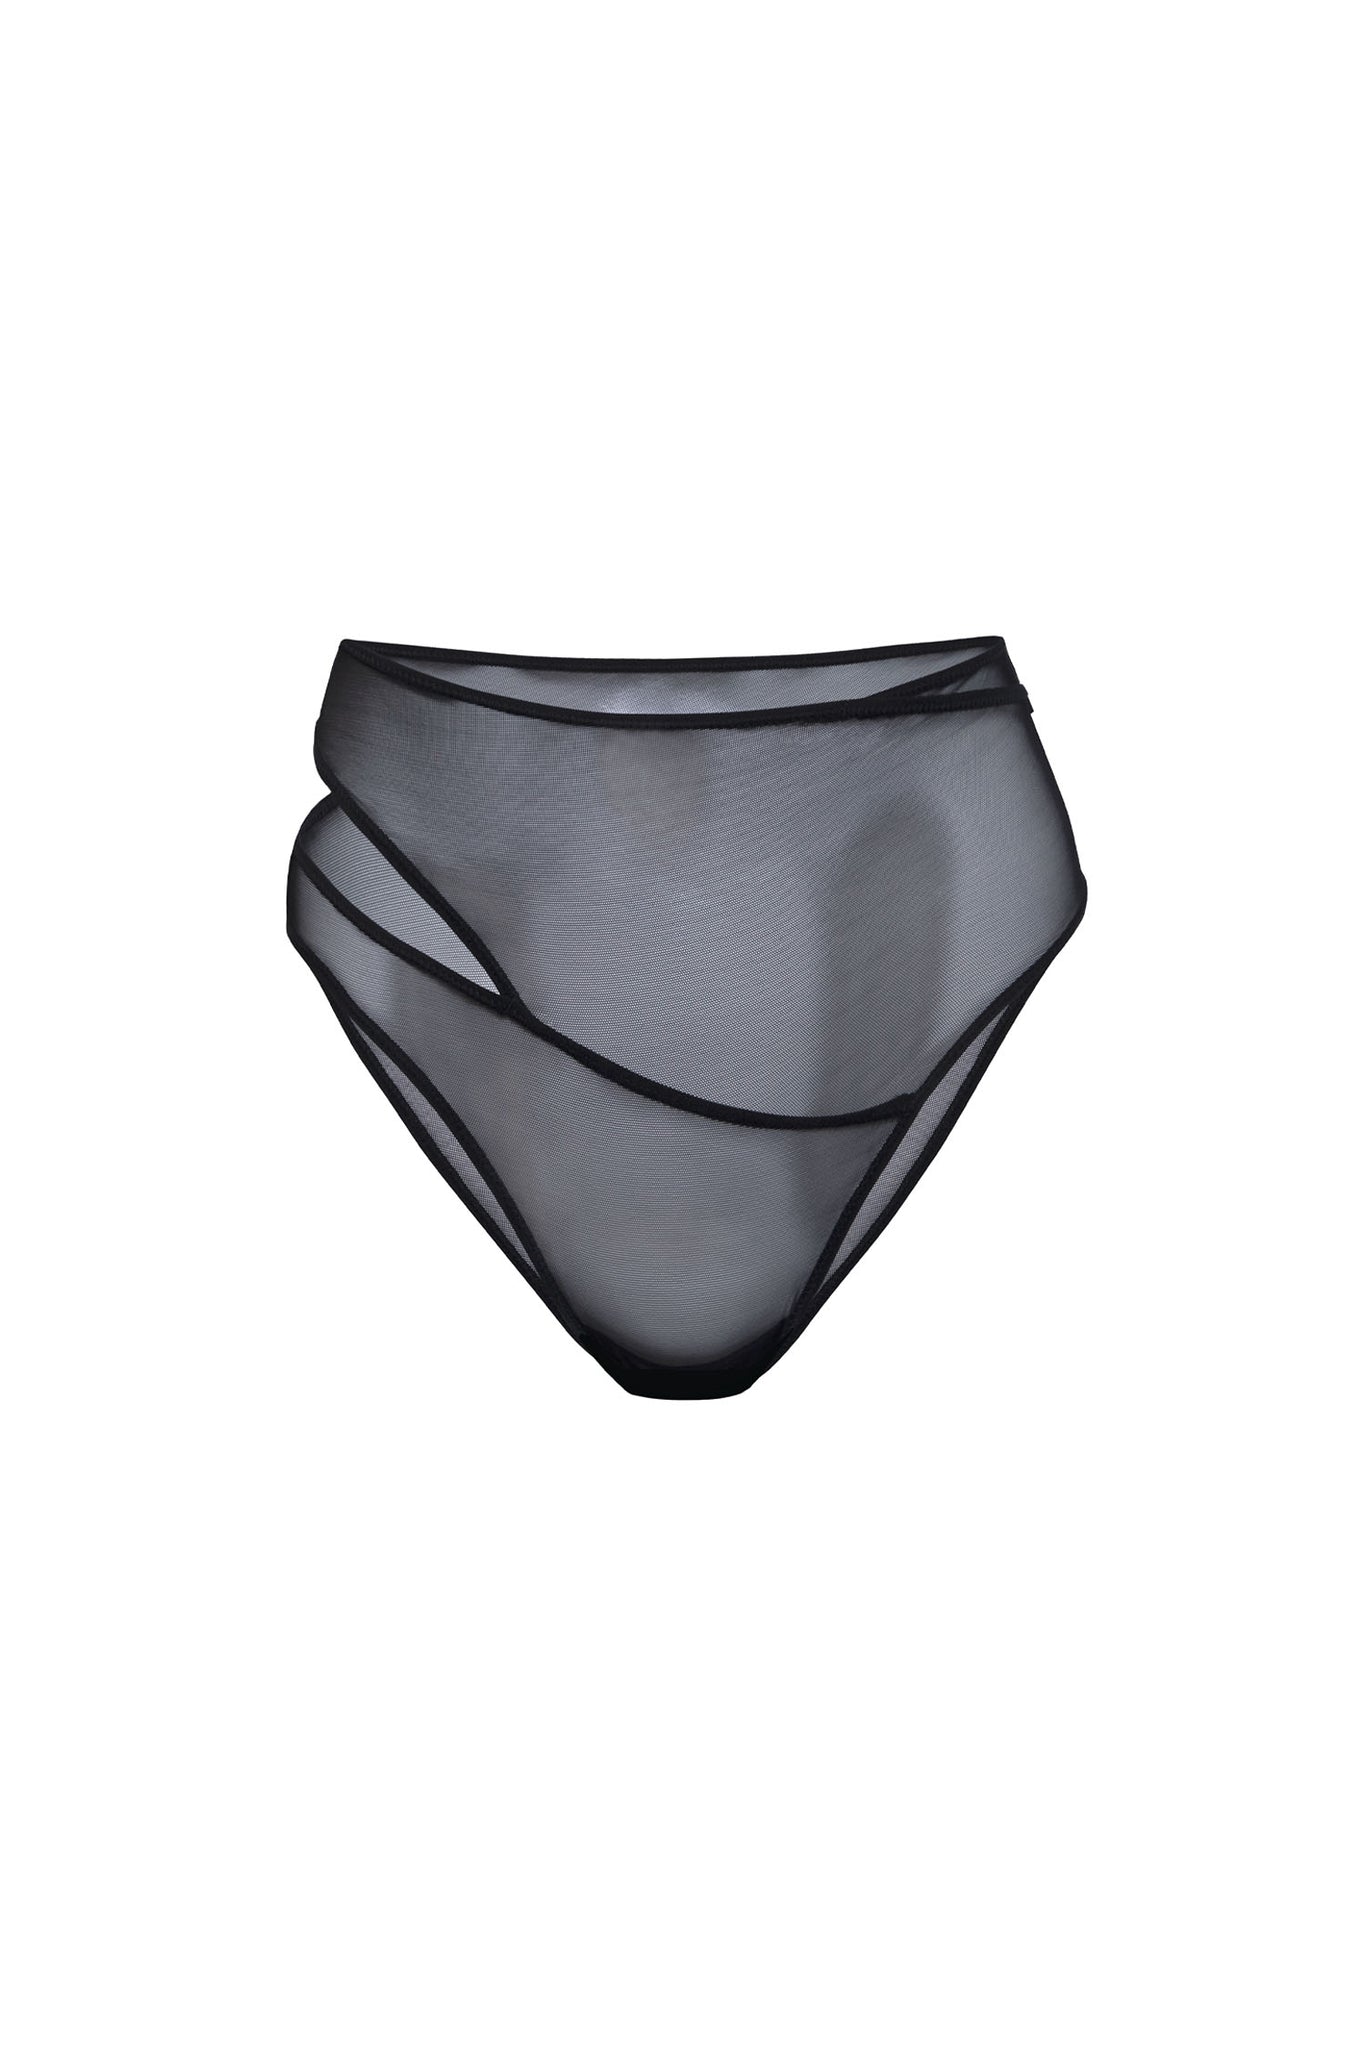 SPIRAL UNDIES / HIGH RISE / BLACK – Overall Office